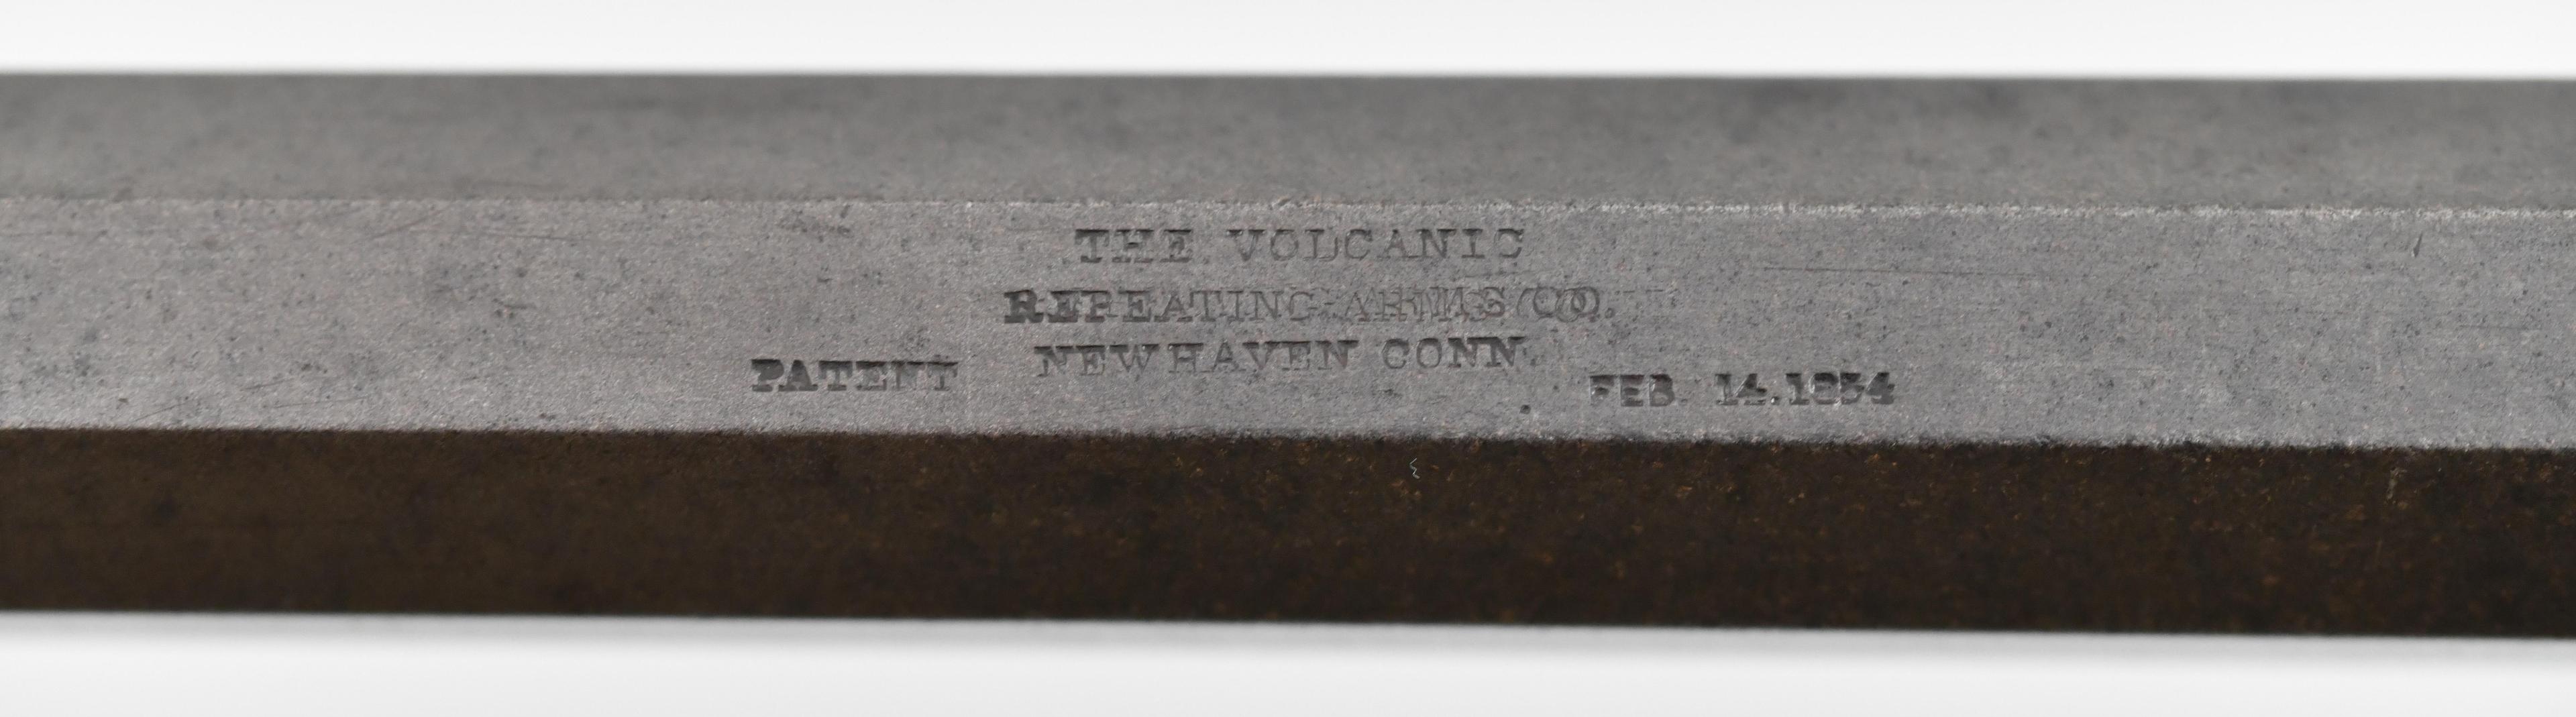 * Extremely scarce The Volcanic Repeating Arms Co.